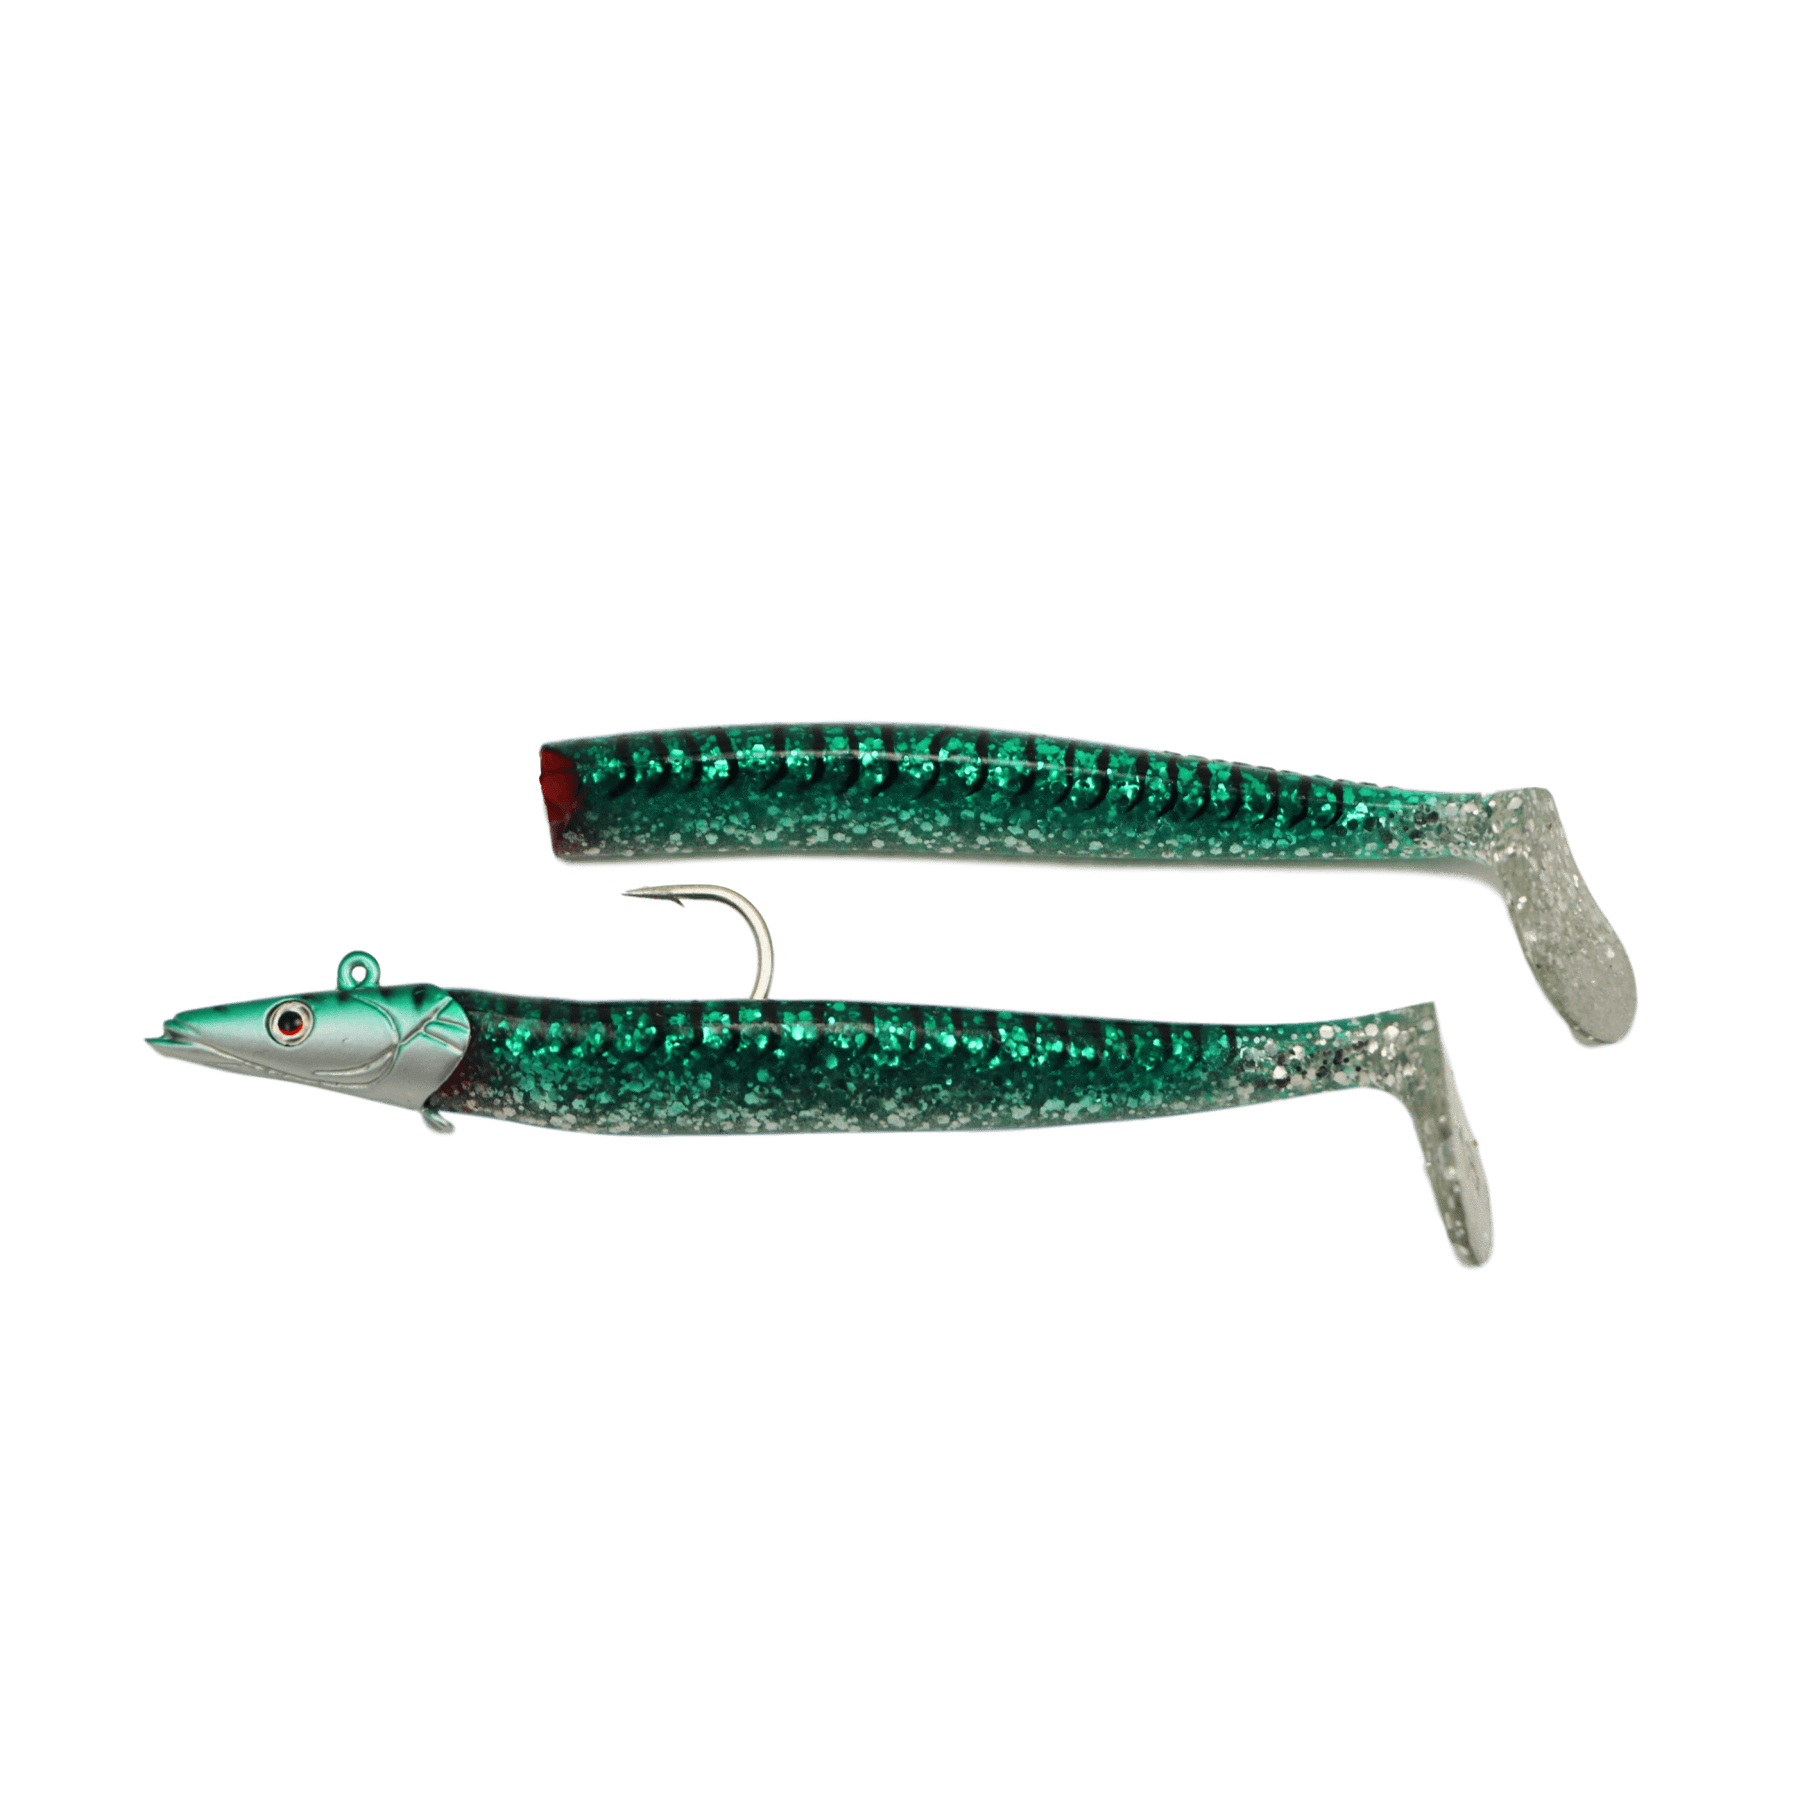  Savage Gear Sandeel Fishing Bait, 4/5 oz, Mackerel, Realistic  Contours & Movement, Durable Construction, Two Tie Points, 5X Hooks,  Holographic Eyes, Bait Keeper : Sports & Outdoors